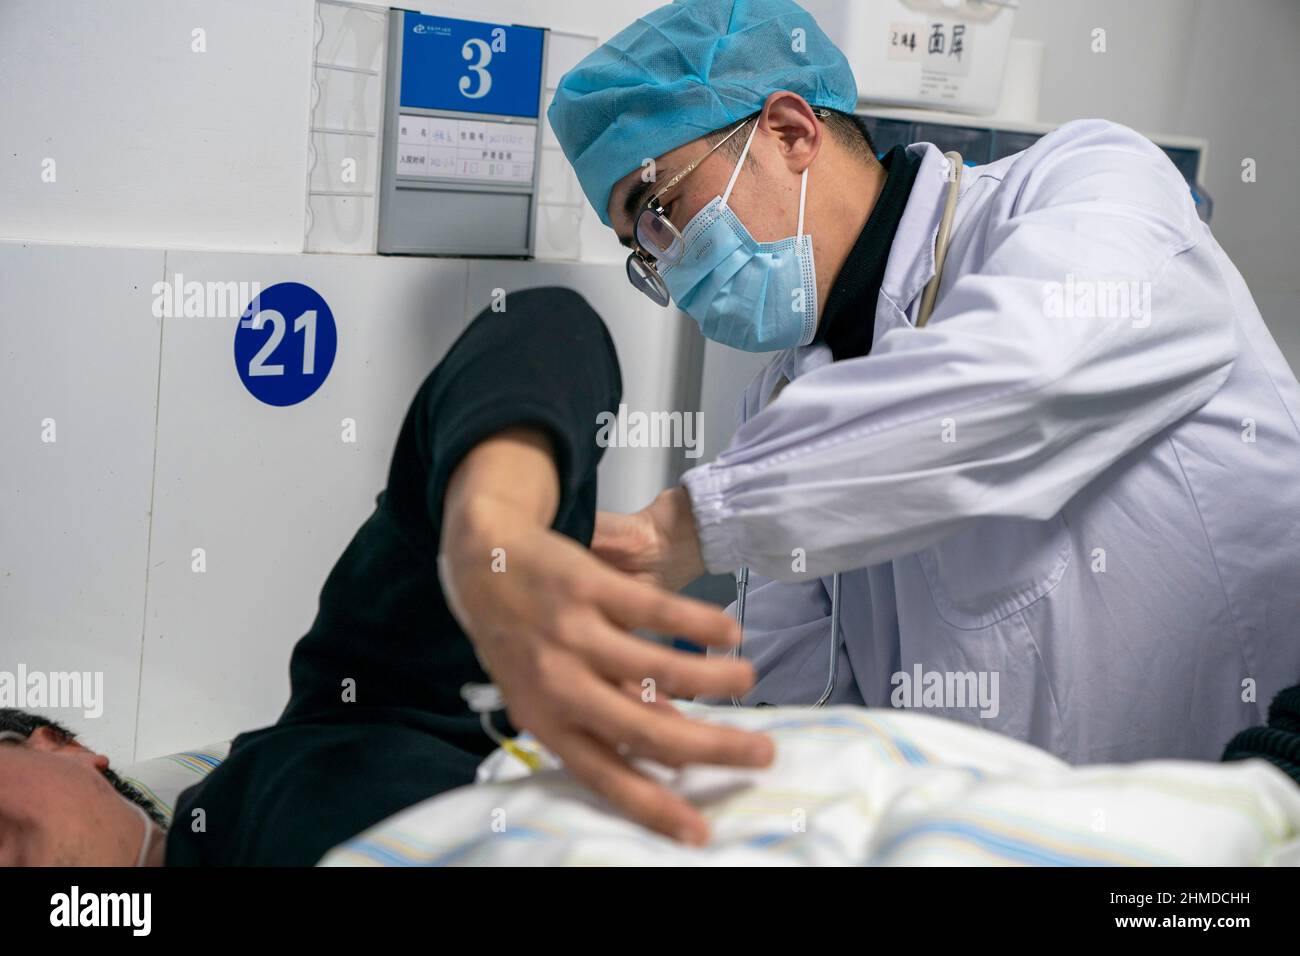 ENSHI, CHINA - FEBRUARY 9, 2022 - A doctor receives a critically ill patient in Enshi, Hubei Province, China, Feb 9, 2022. Stock Photo